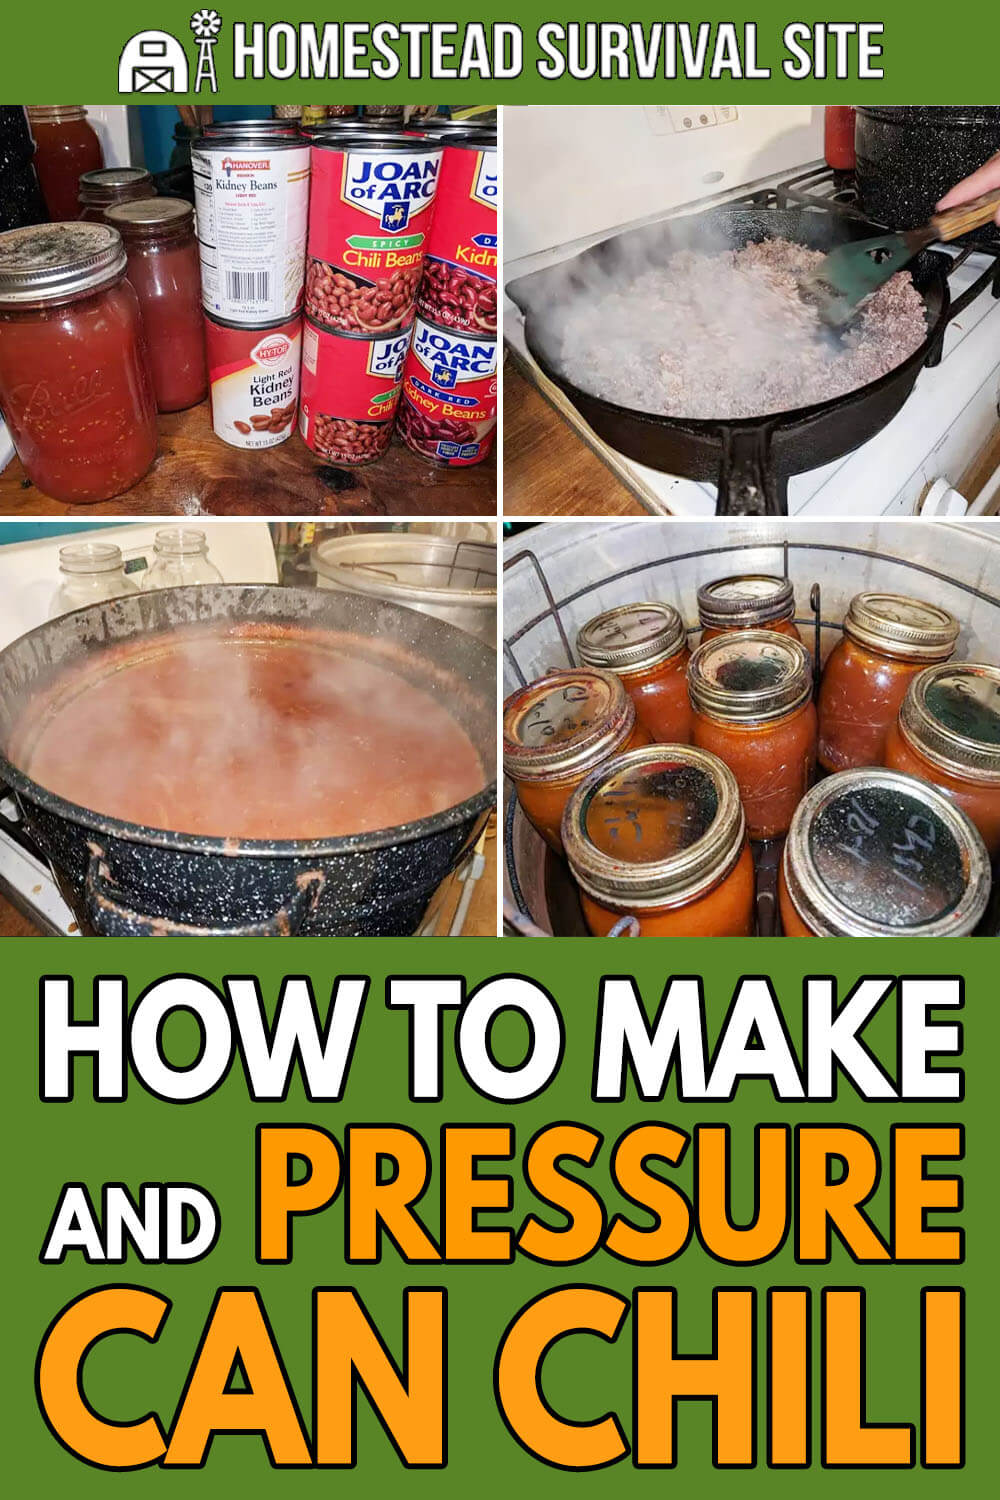 How To Make And Pressure Can Chili